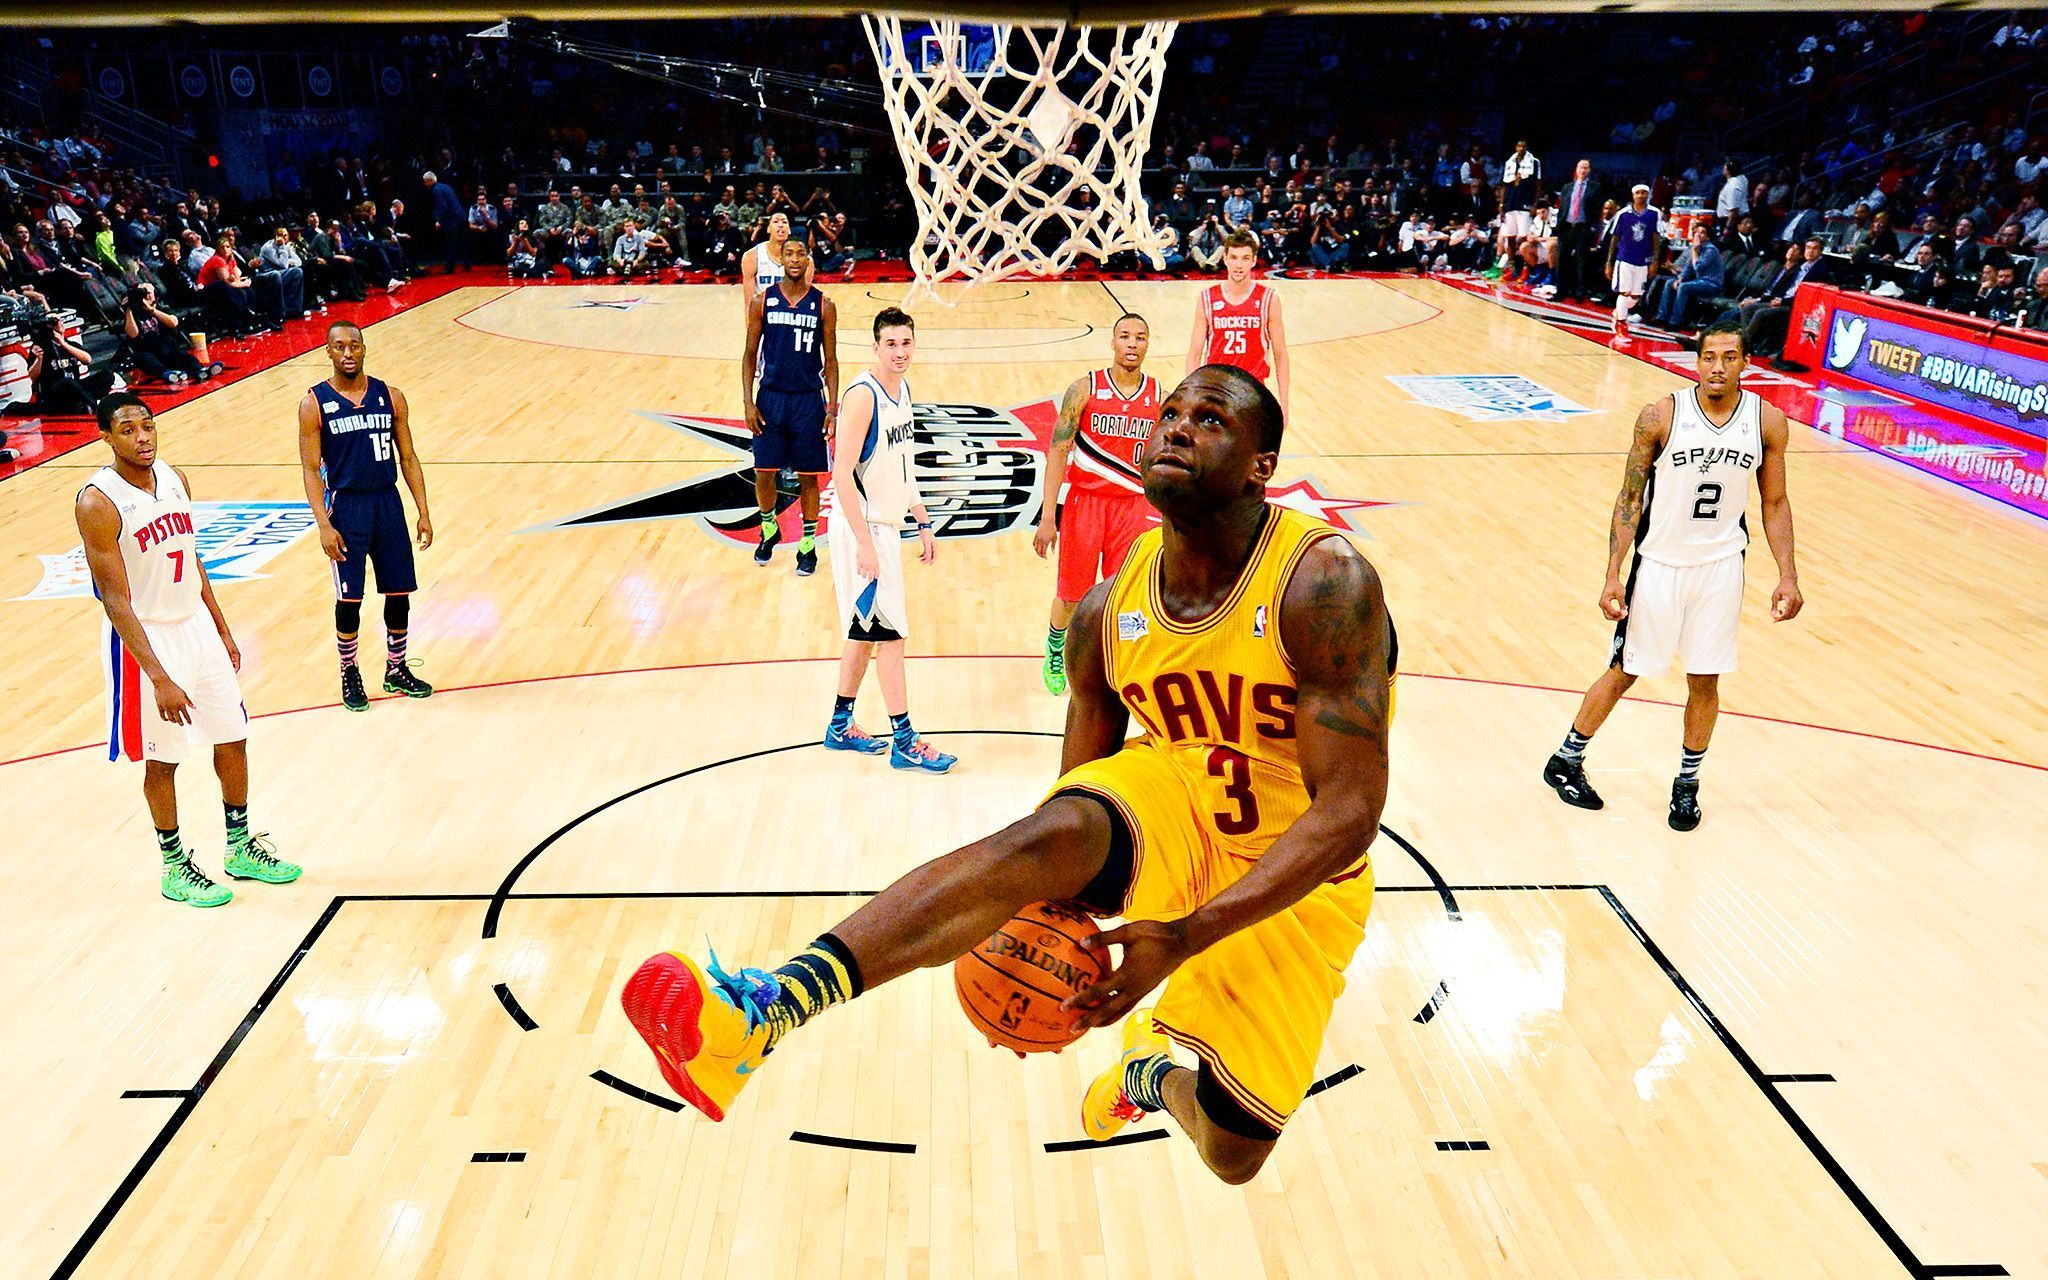 NBA basketball wallpapers of the biggest events and best players